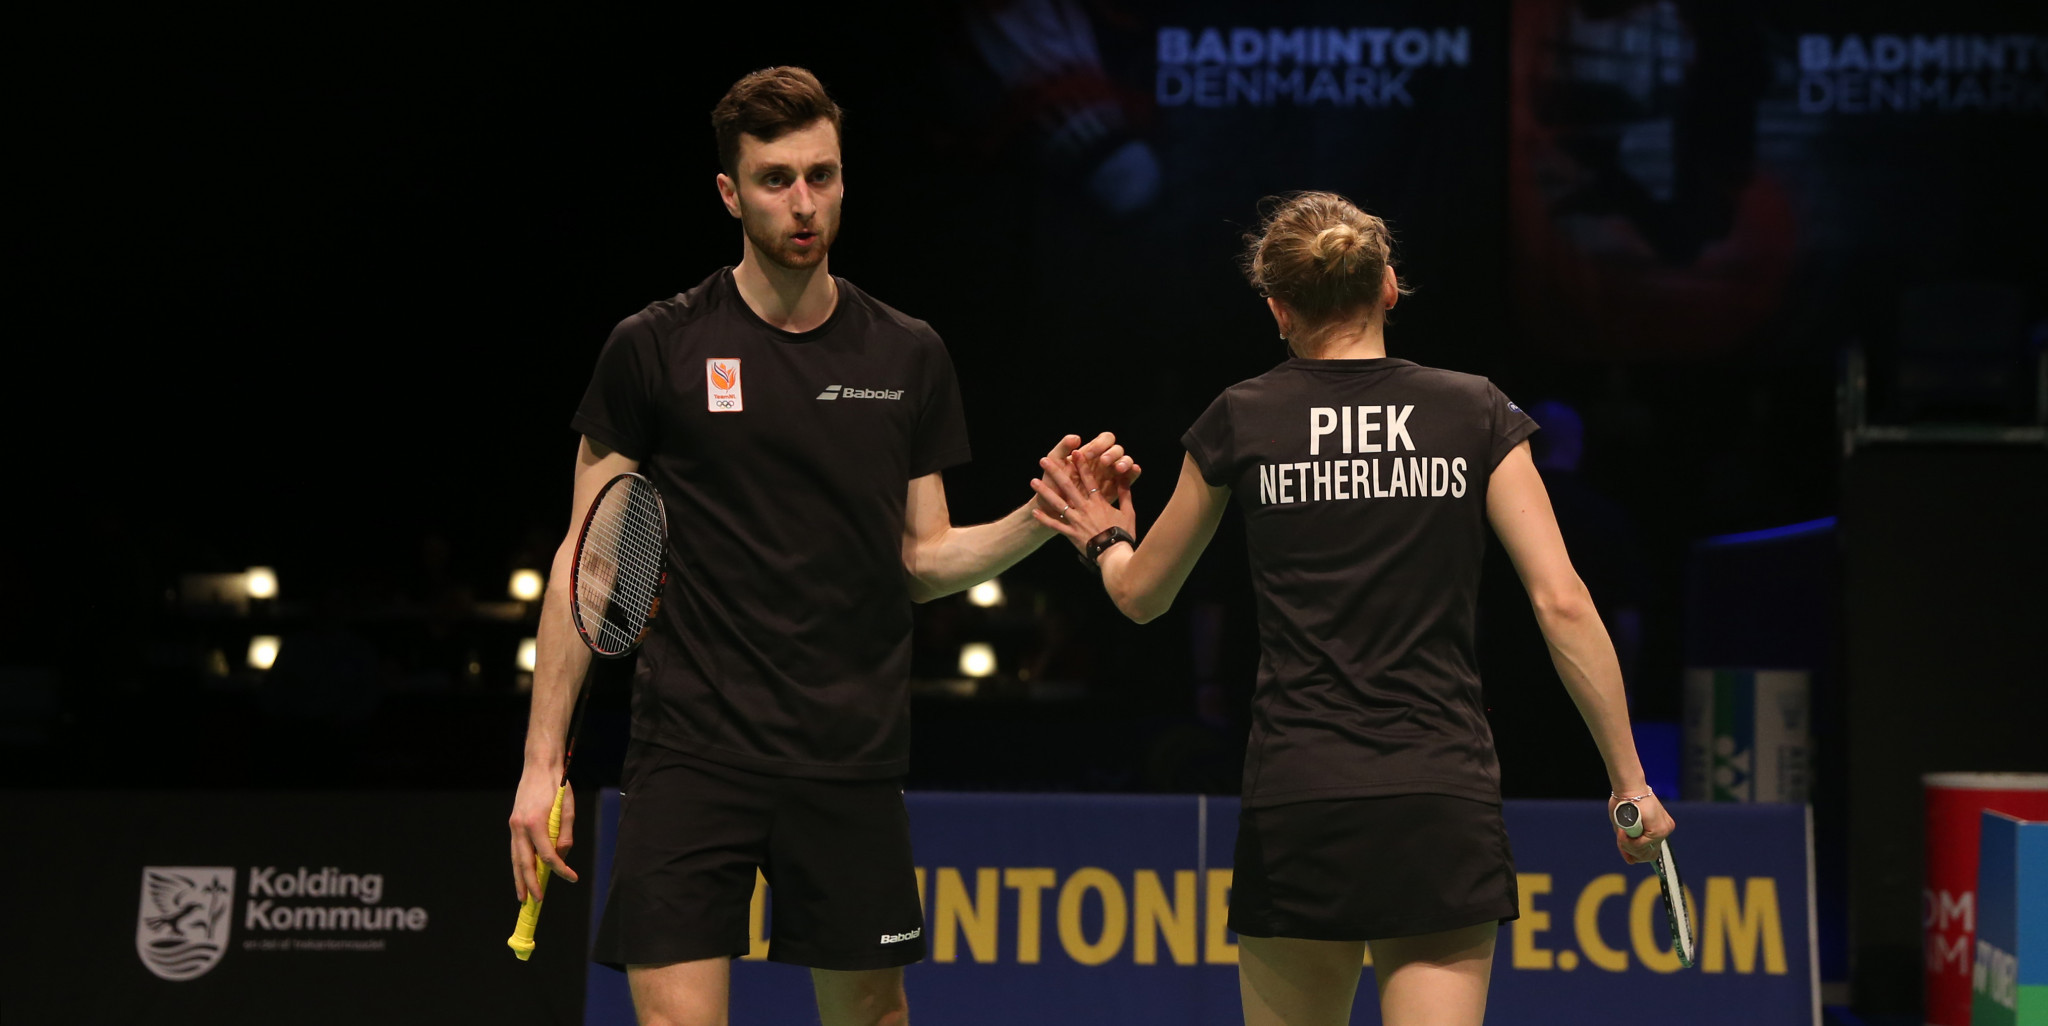 Eefje Muskens and Selena Piek will be among the main Dutch hopes when main draw action begins ©Badminton Europe